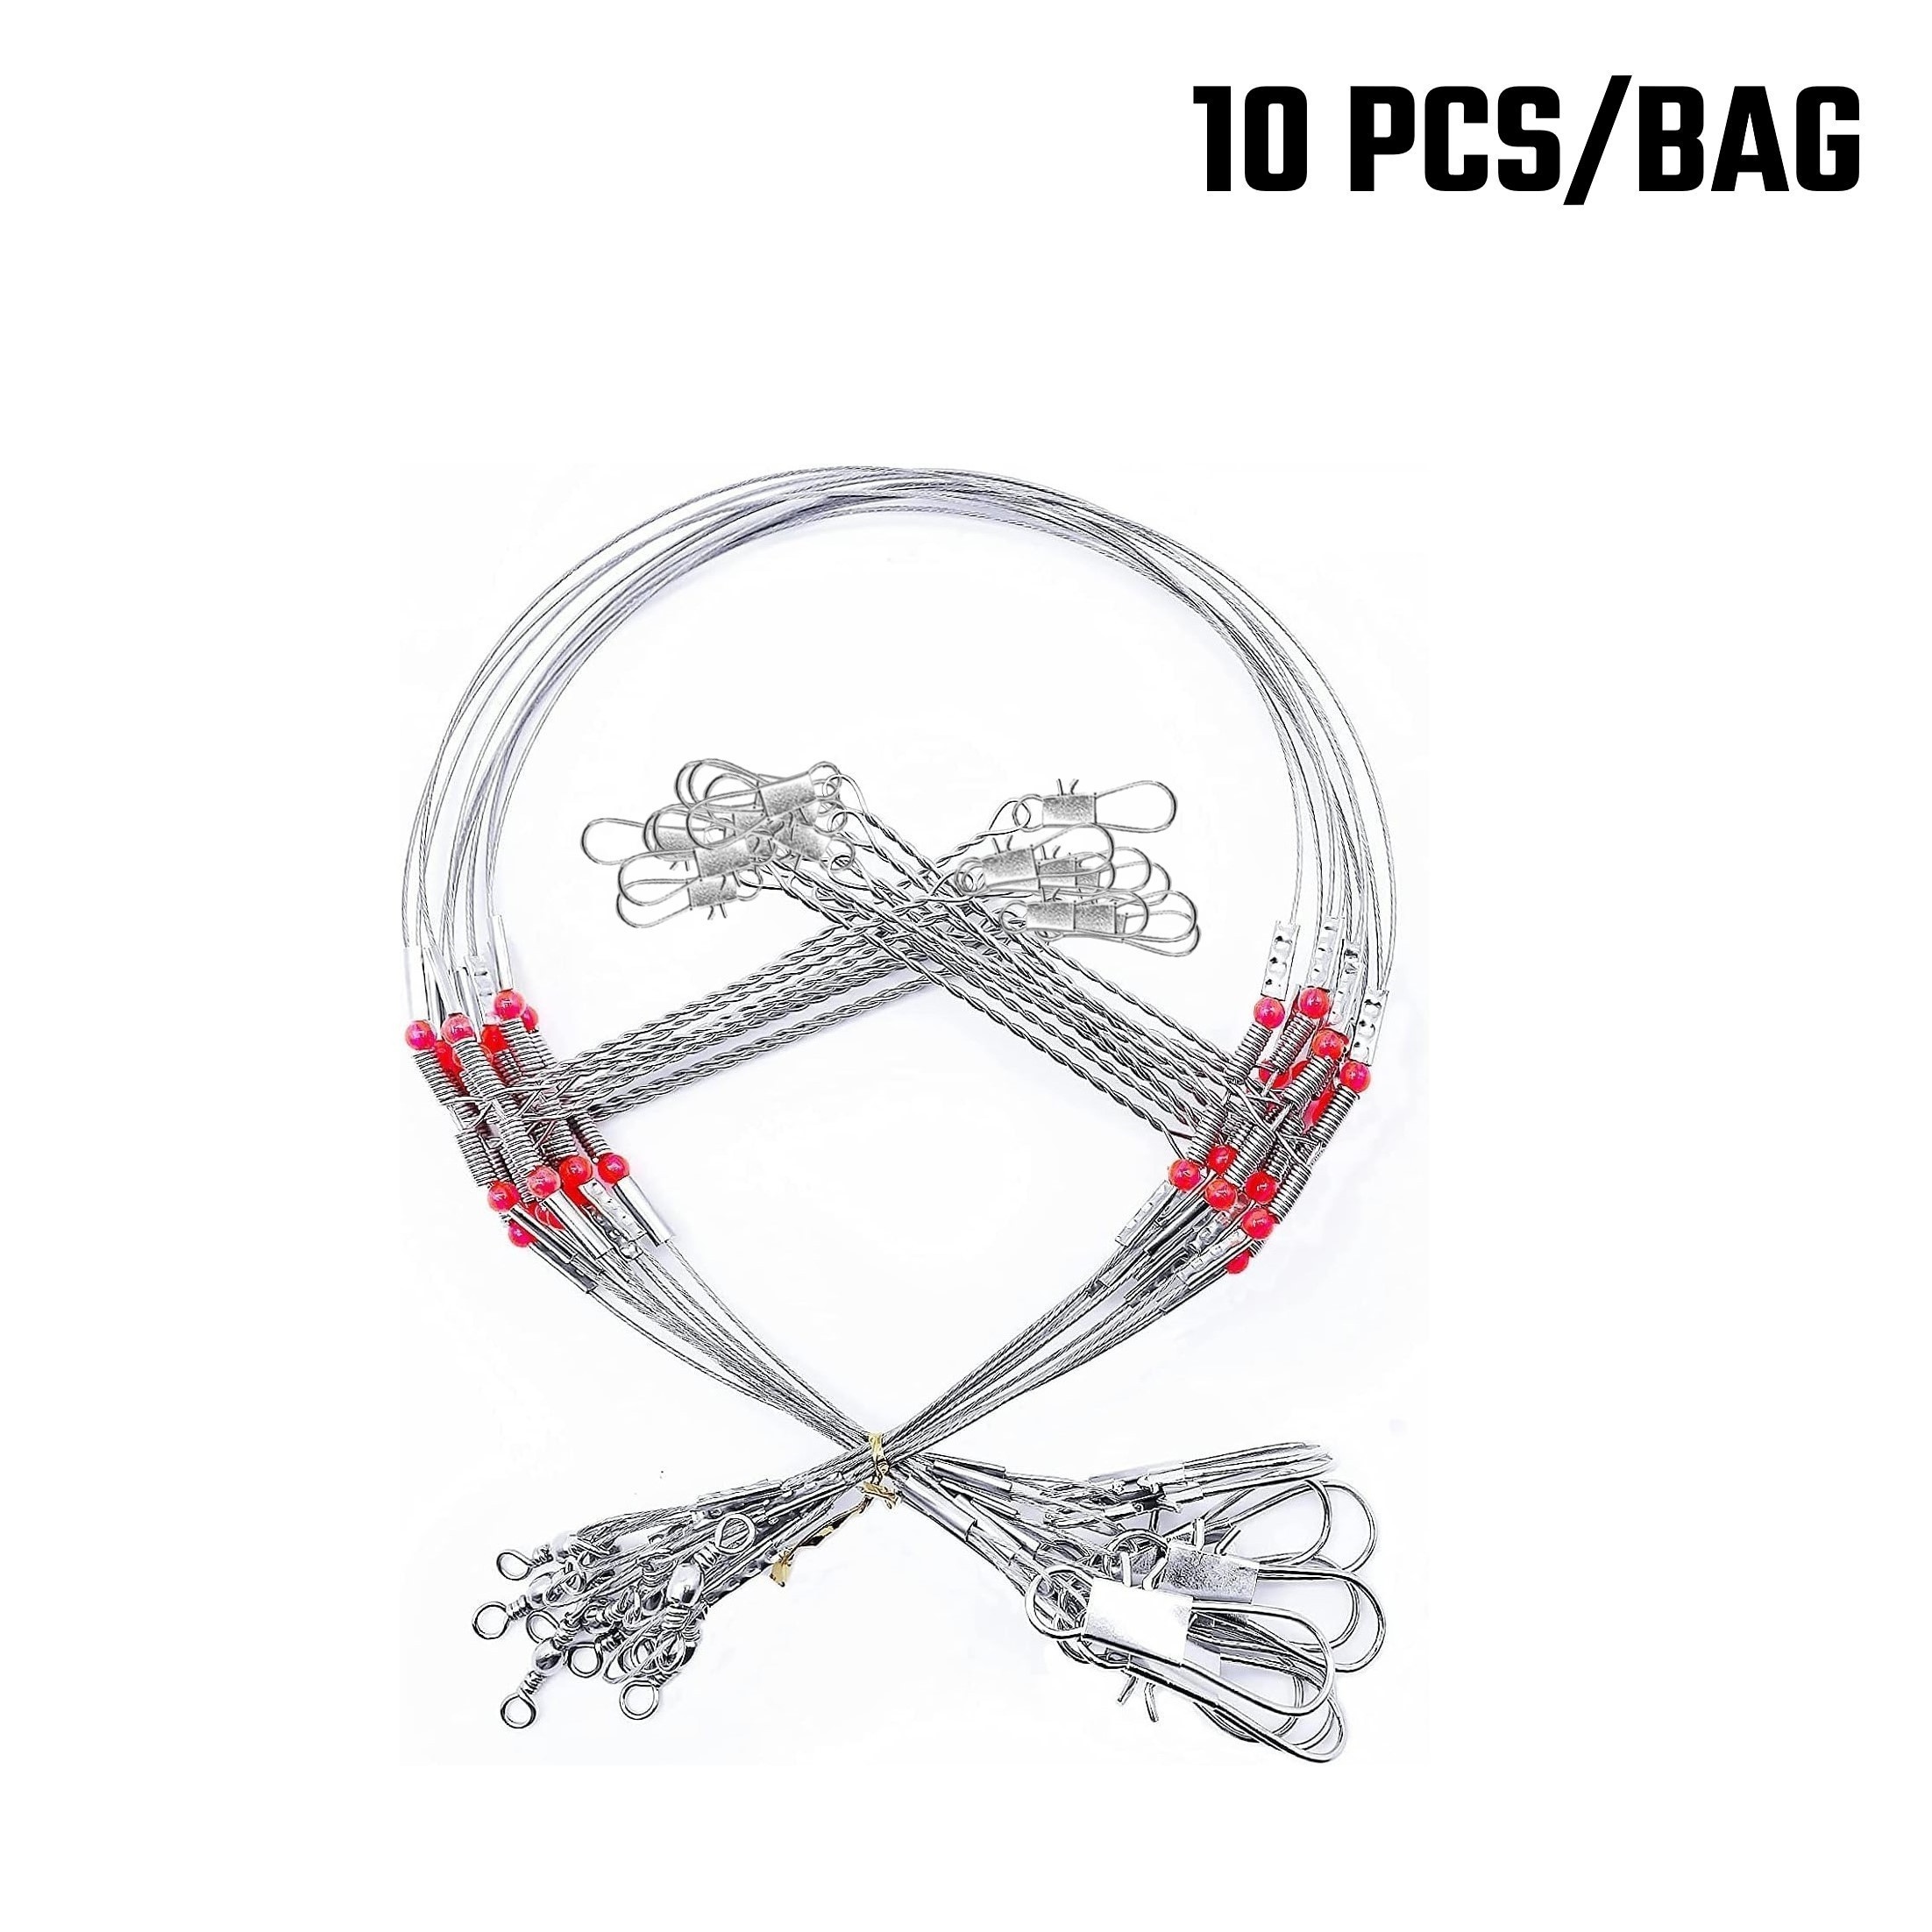  Fishing Leaders Saltwater Bottom Rigs,12pcs Stainless Steel  Fishing Wire Leader Rigs with Swivel Snap Beads High-Strength Saltwater  Surf Fishing Tackle Rig for Lure Bait Hook 1Arm/2Arm : Sports & Outdoors